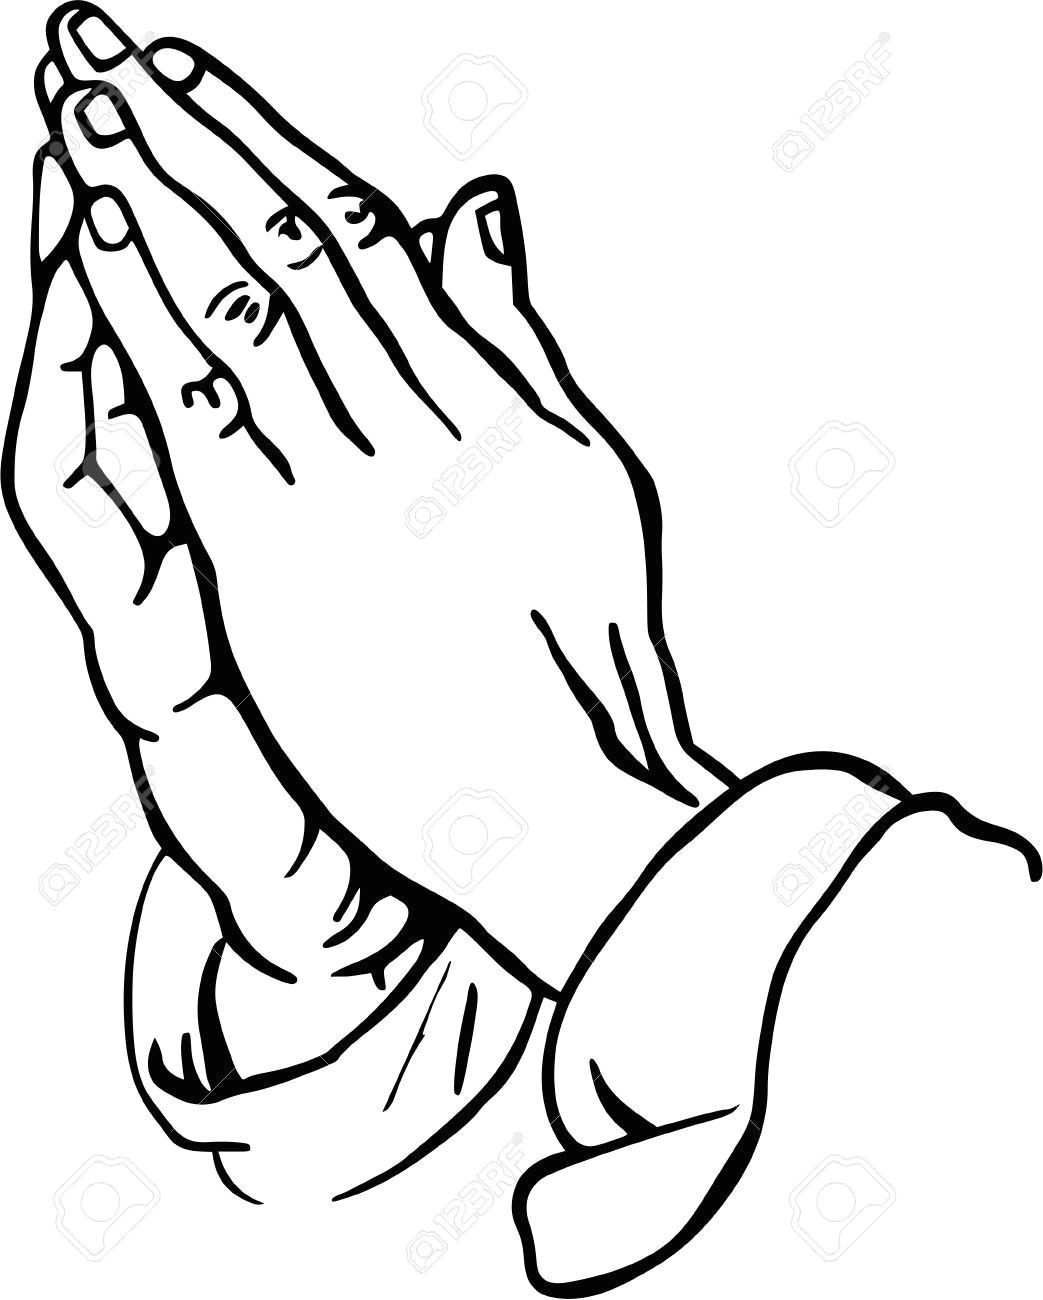 Drawing Hands In islam Praying Hands Clipart Stock Photo Picture and Royalty Free Image